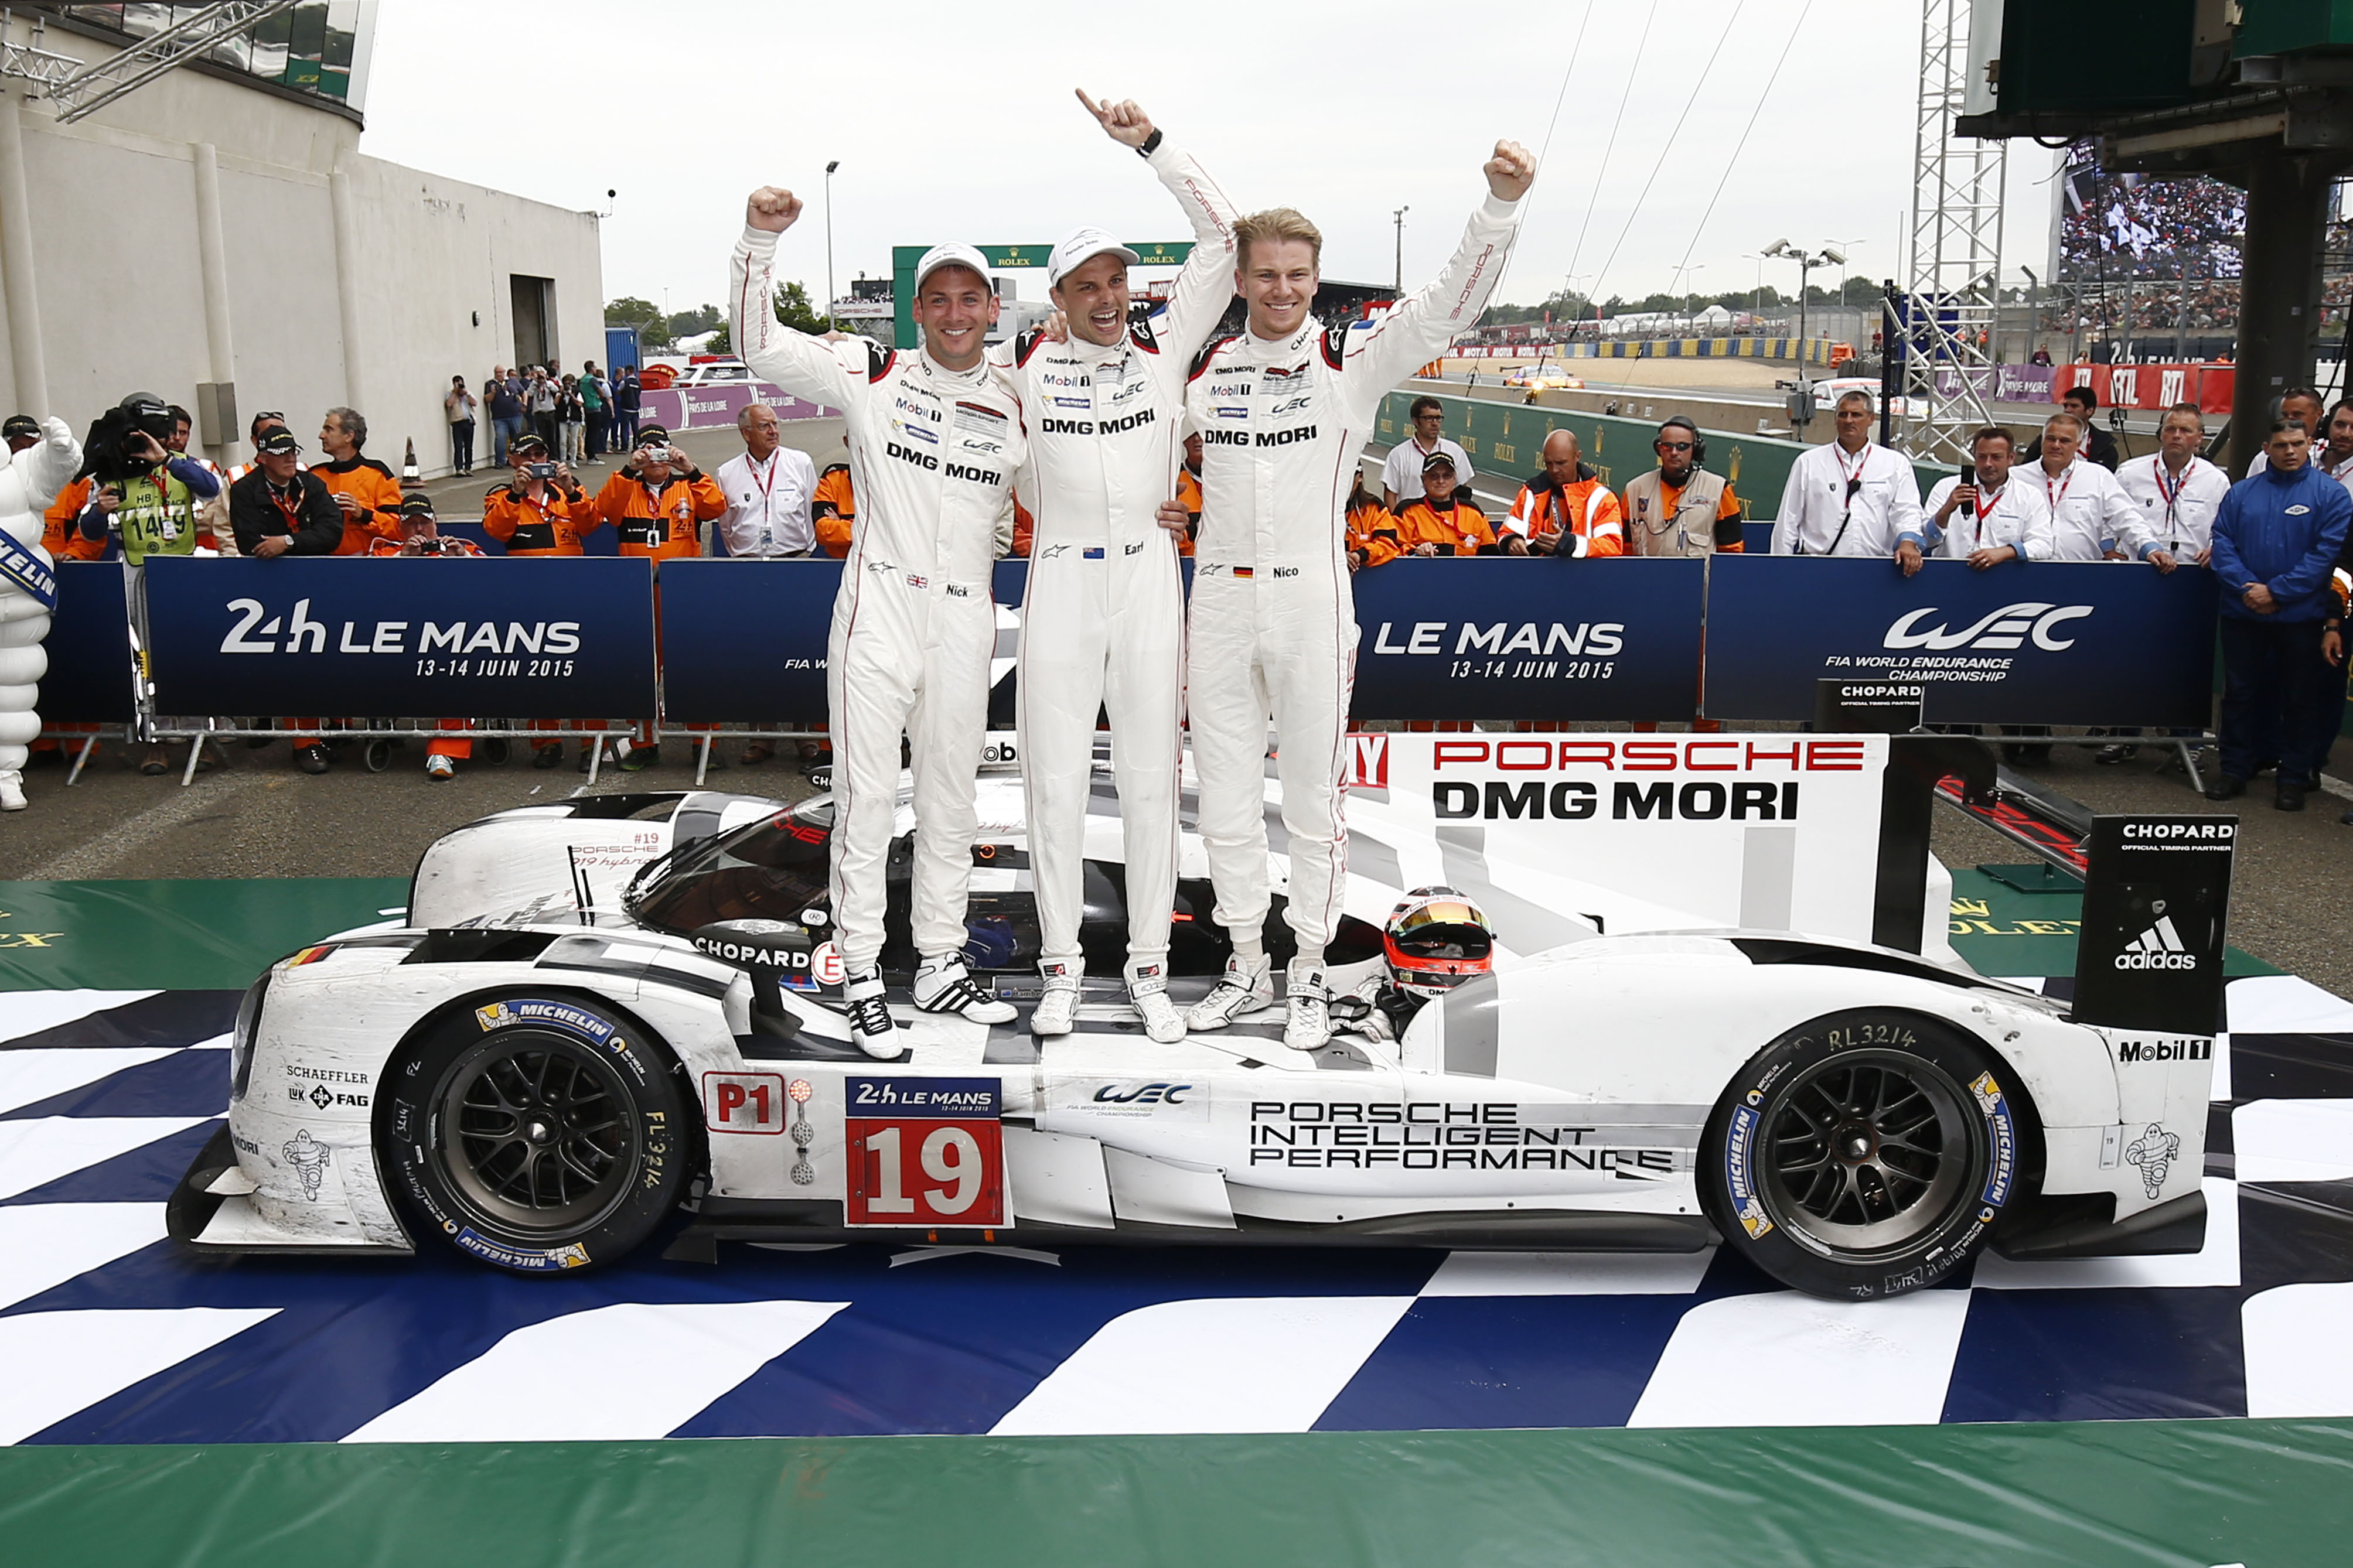 Le Mans 2015: Porsche takes 17th win, first in 17 years - paultan.org